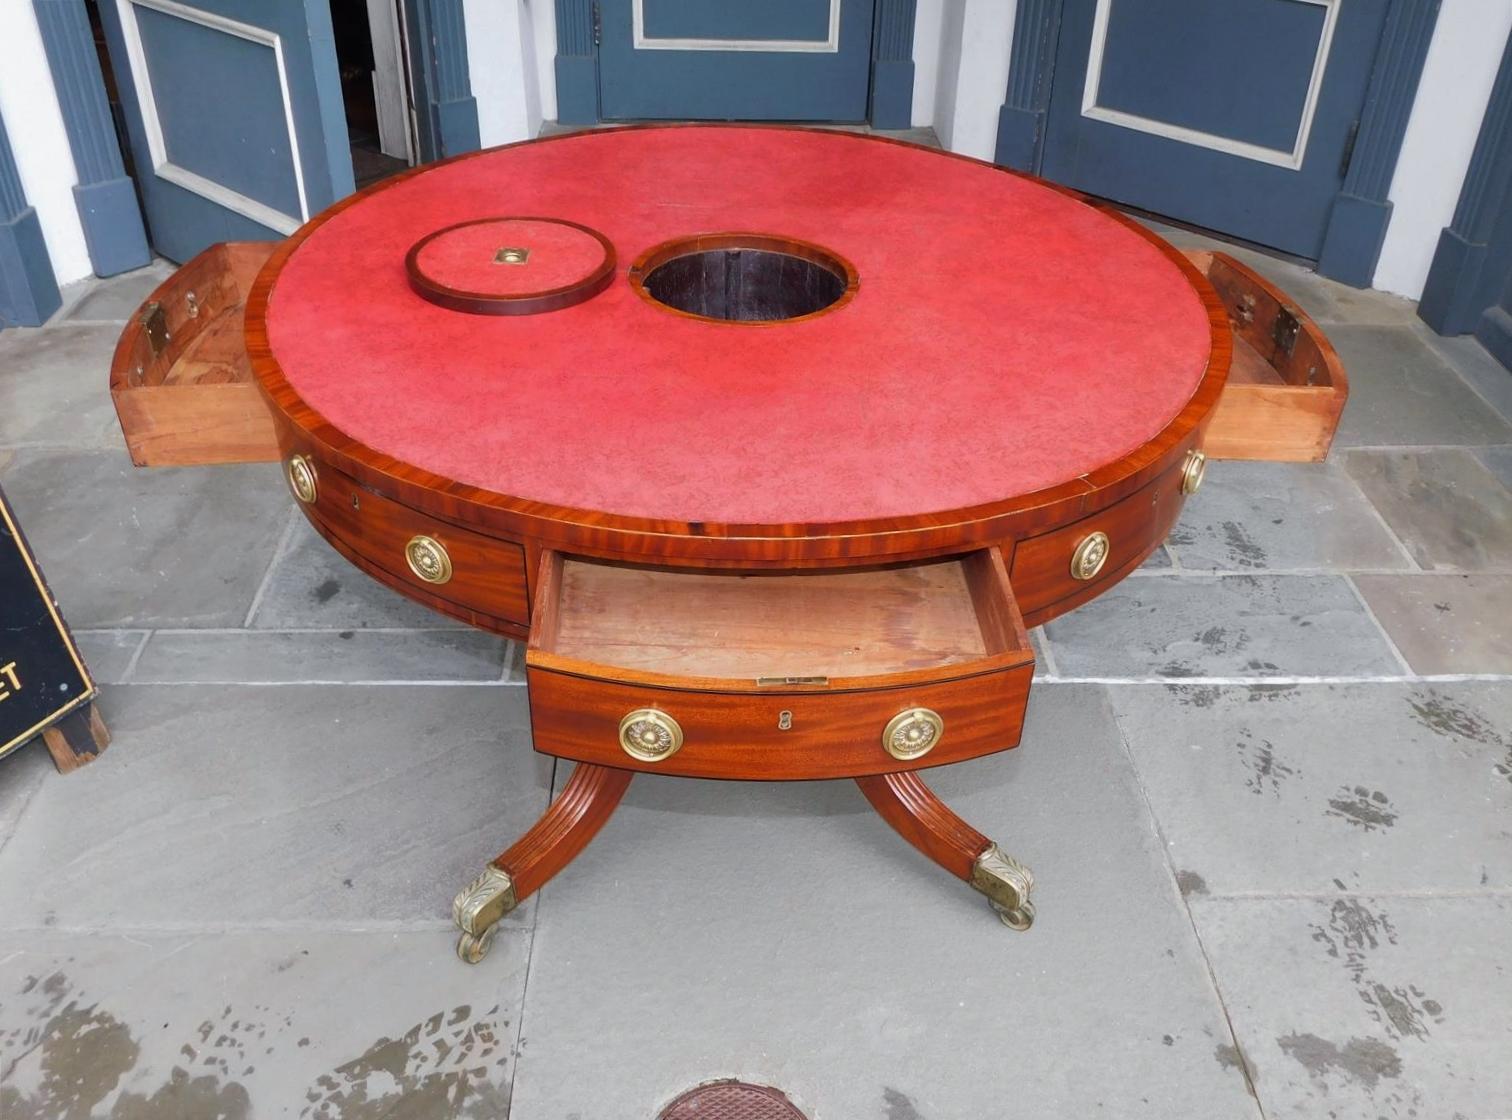 English Regency Mahogany Leather Top Ebony Inlaid Rent Table, Circa 1790 For Sale 3